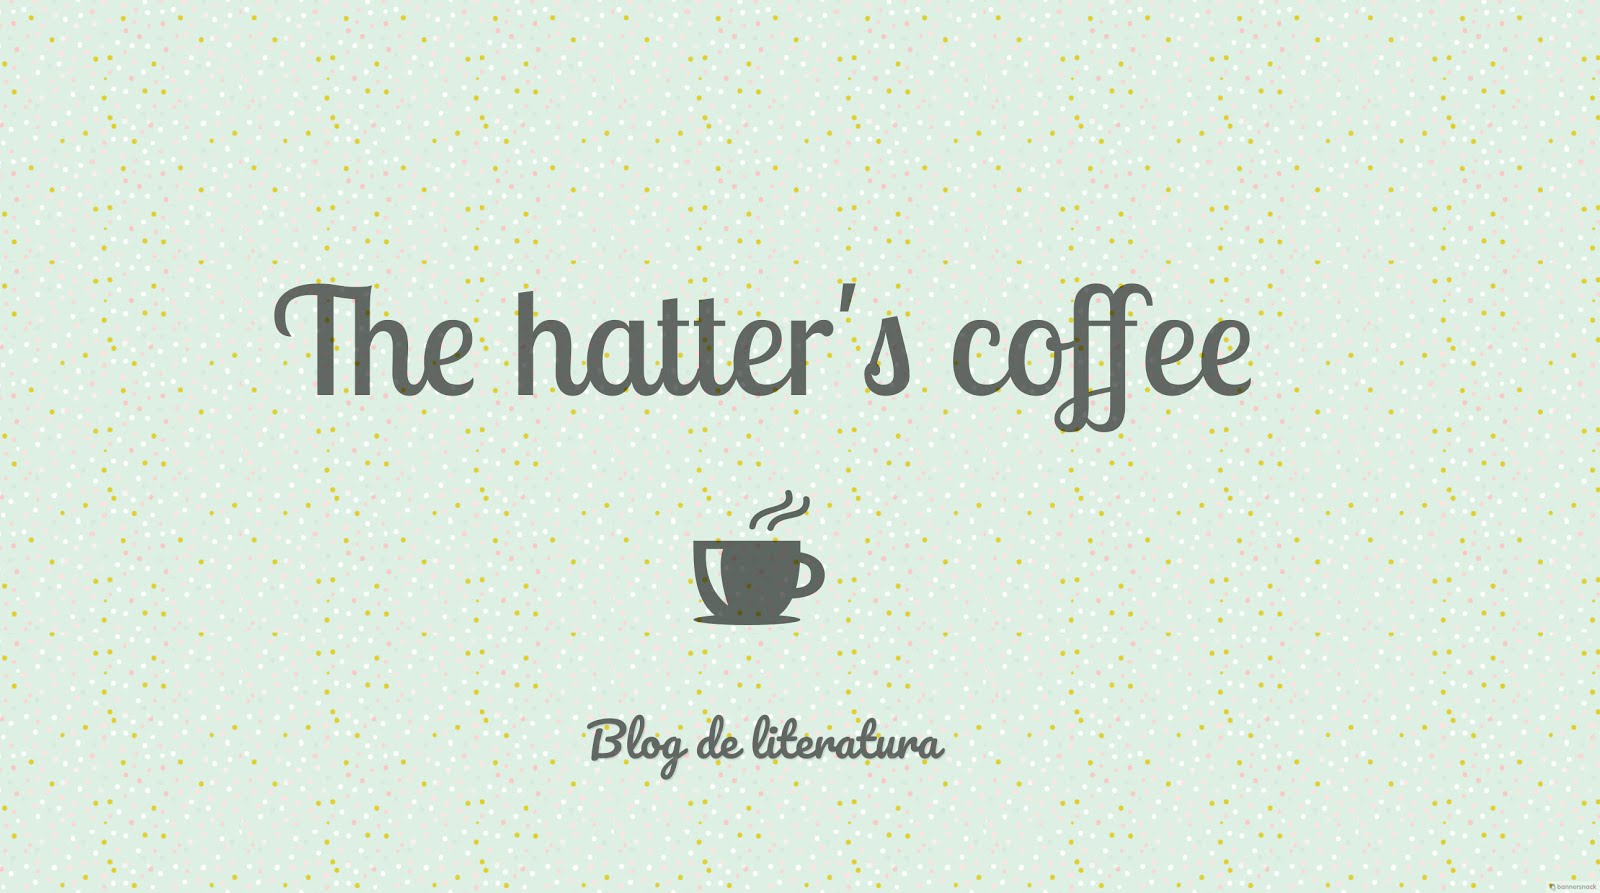 The hatter's coffee